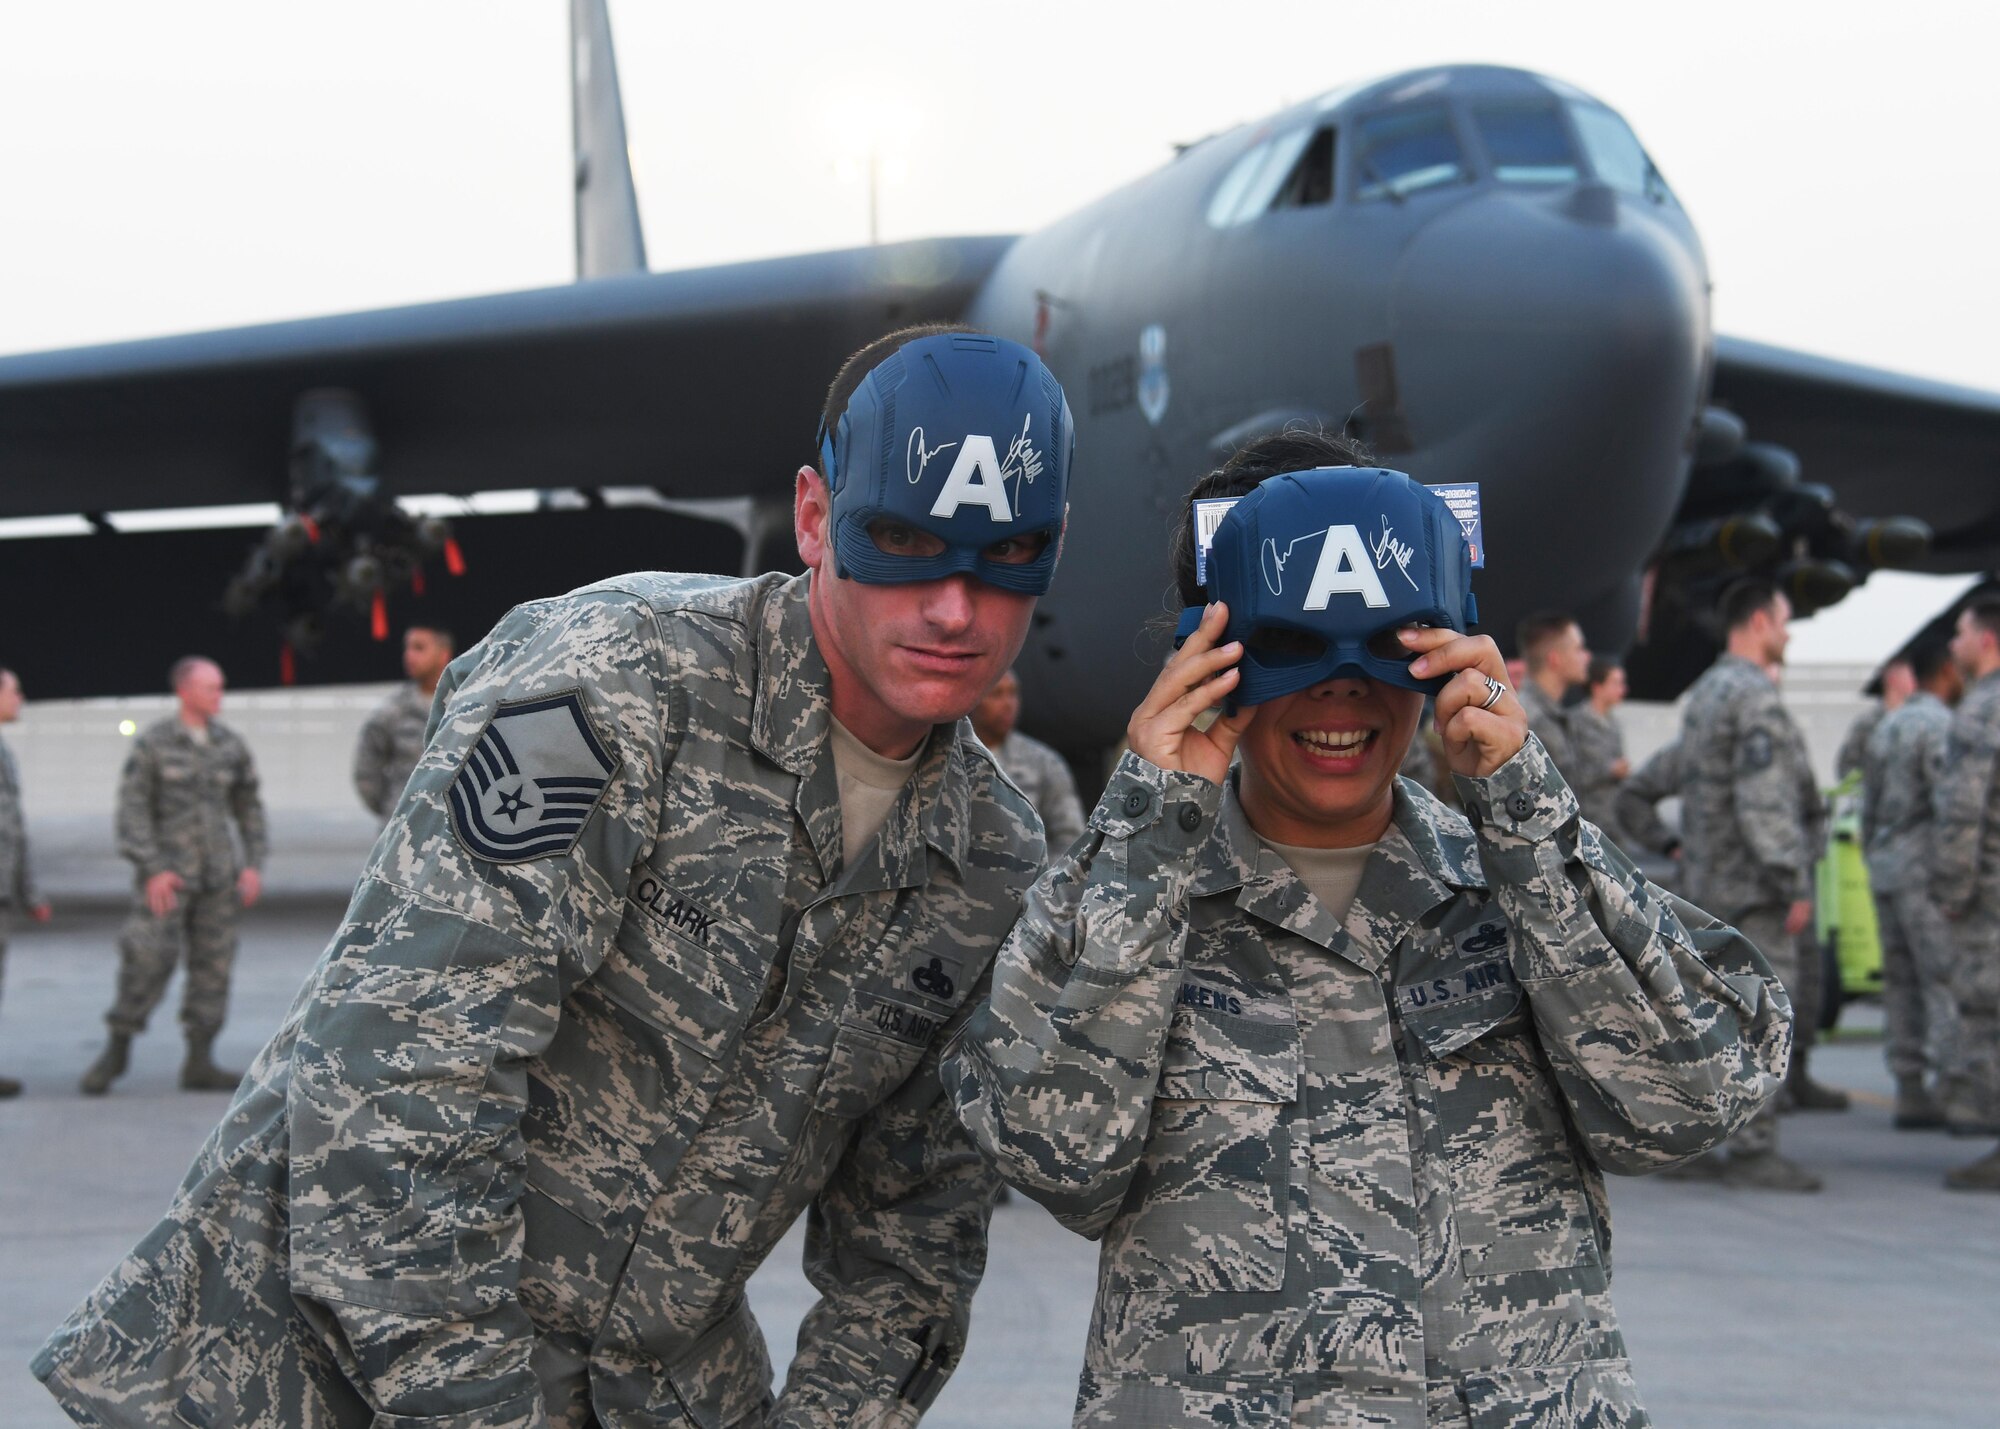 U.S. service members pose with autographed masks in front of a bomber aircraft at Al Udeid Air Base, Qatar, Dec. 6, 2016. The masks were signed by actor Chris Evans, who came to Al Udeid as part of a holiday USO tour. (U.S. Air Force photo by Senior Airman Miles Wilson)